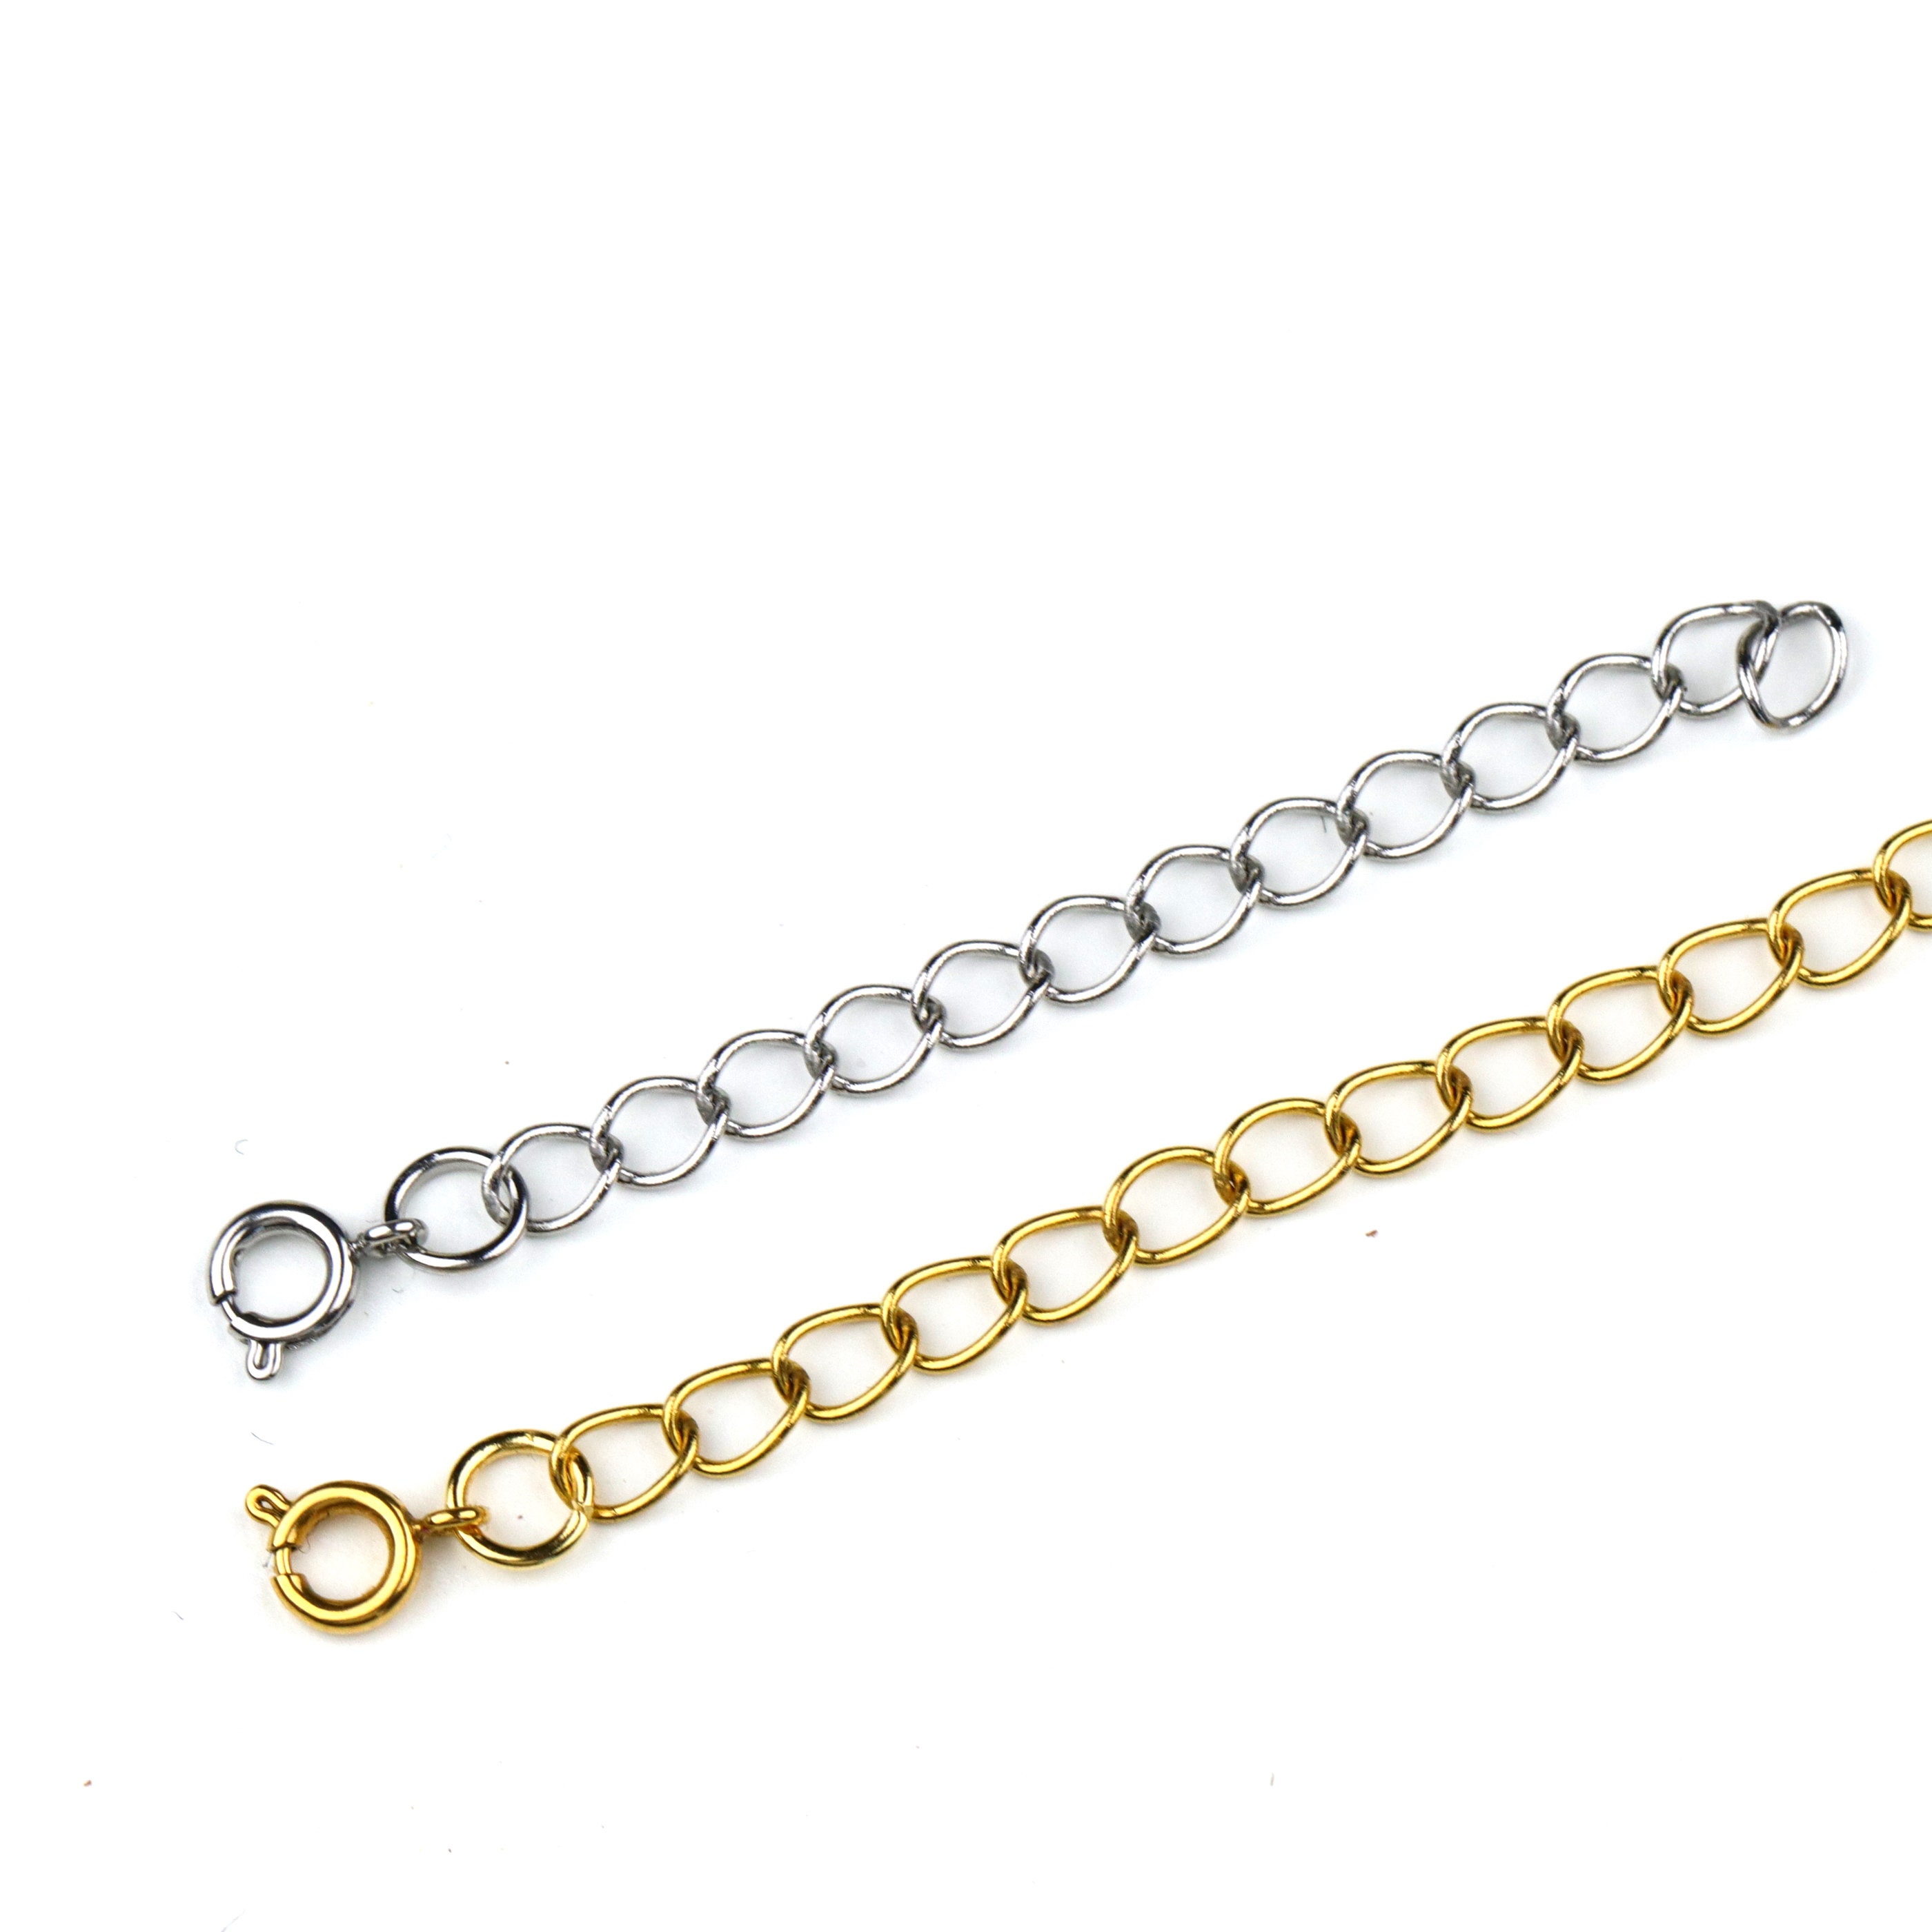 3 1/4 inches, double toggle clasp extender necklace extension